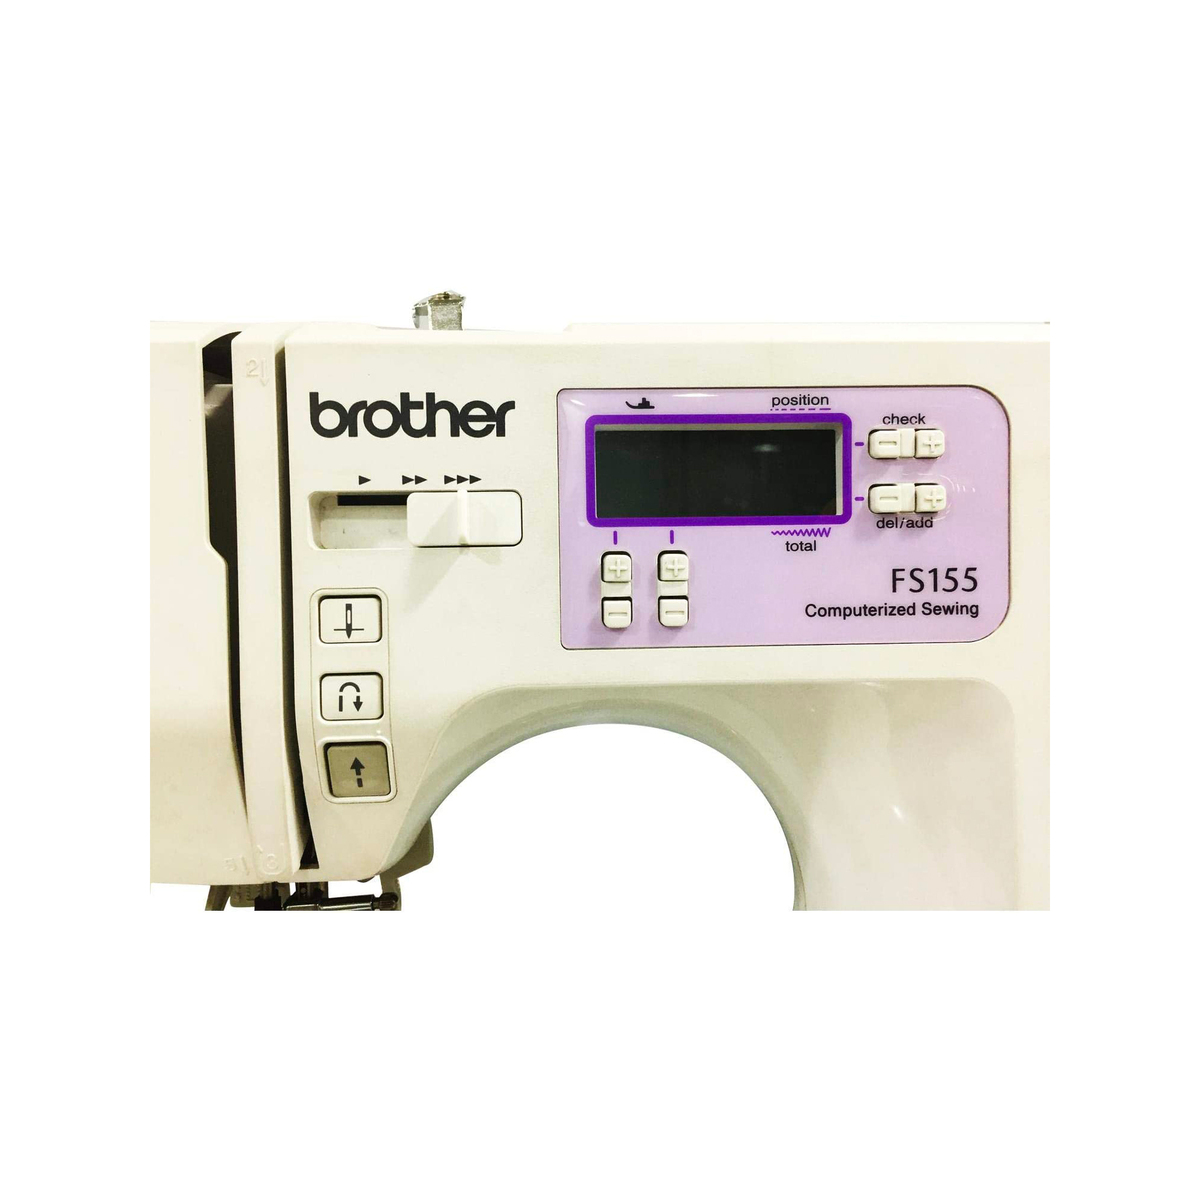 Brother Computerized Sewing machine - FS155